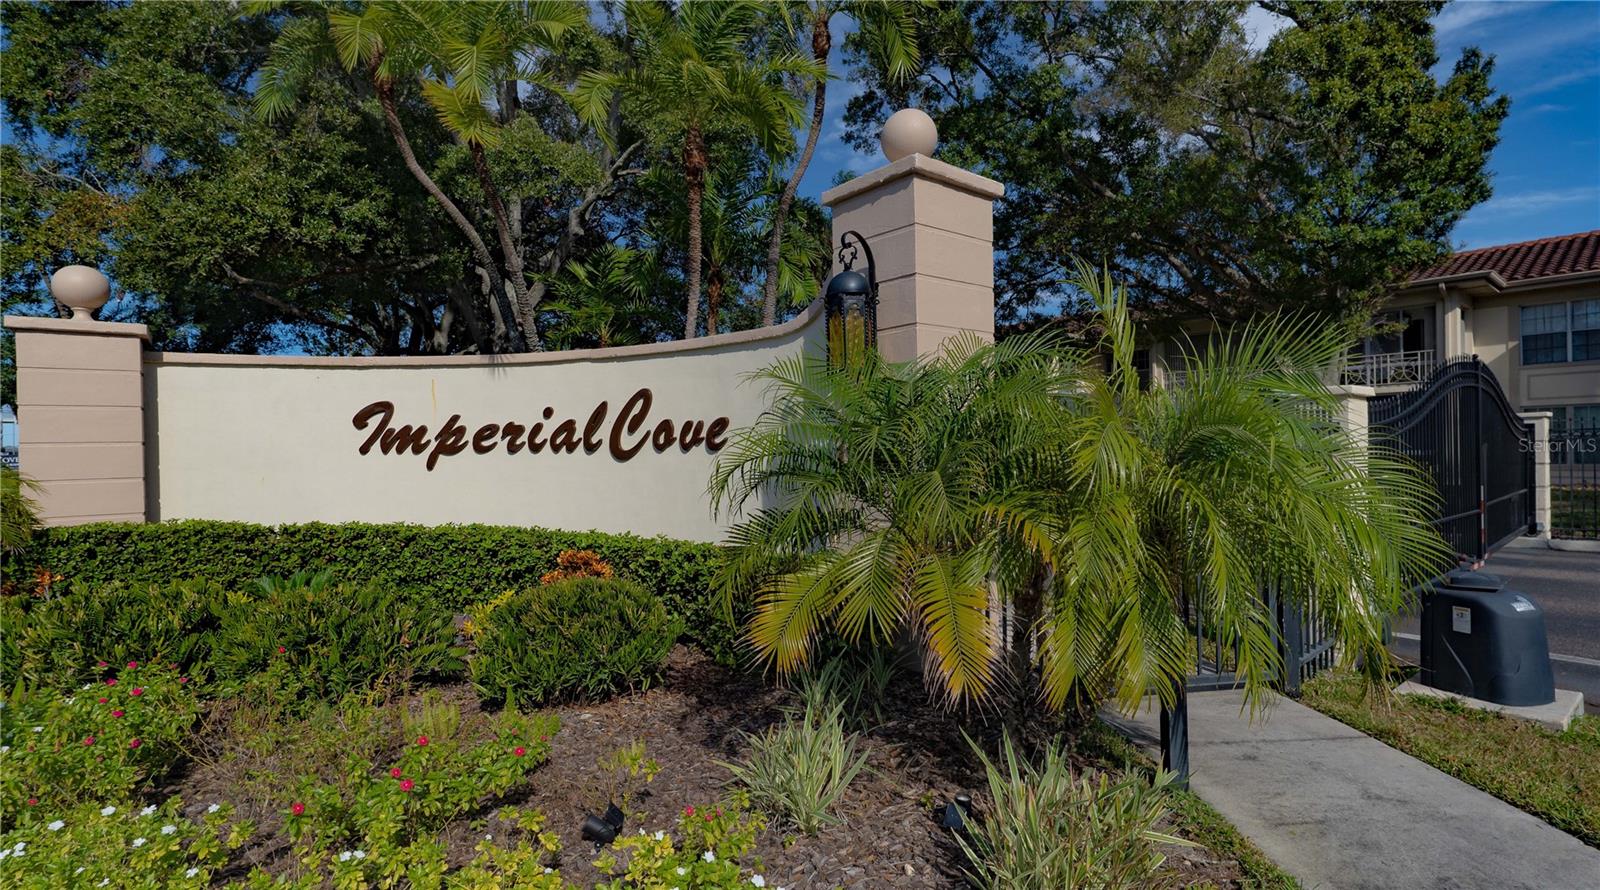 Entrance into Imperial Cove